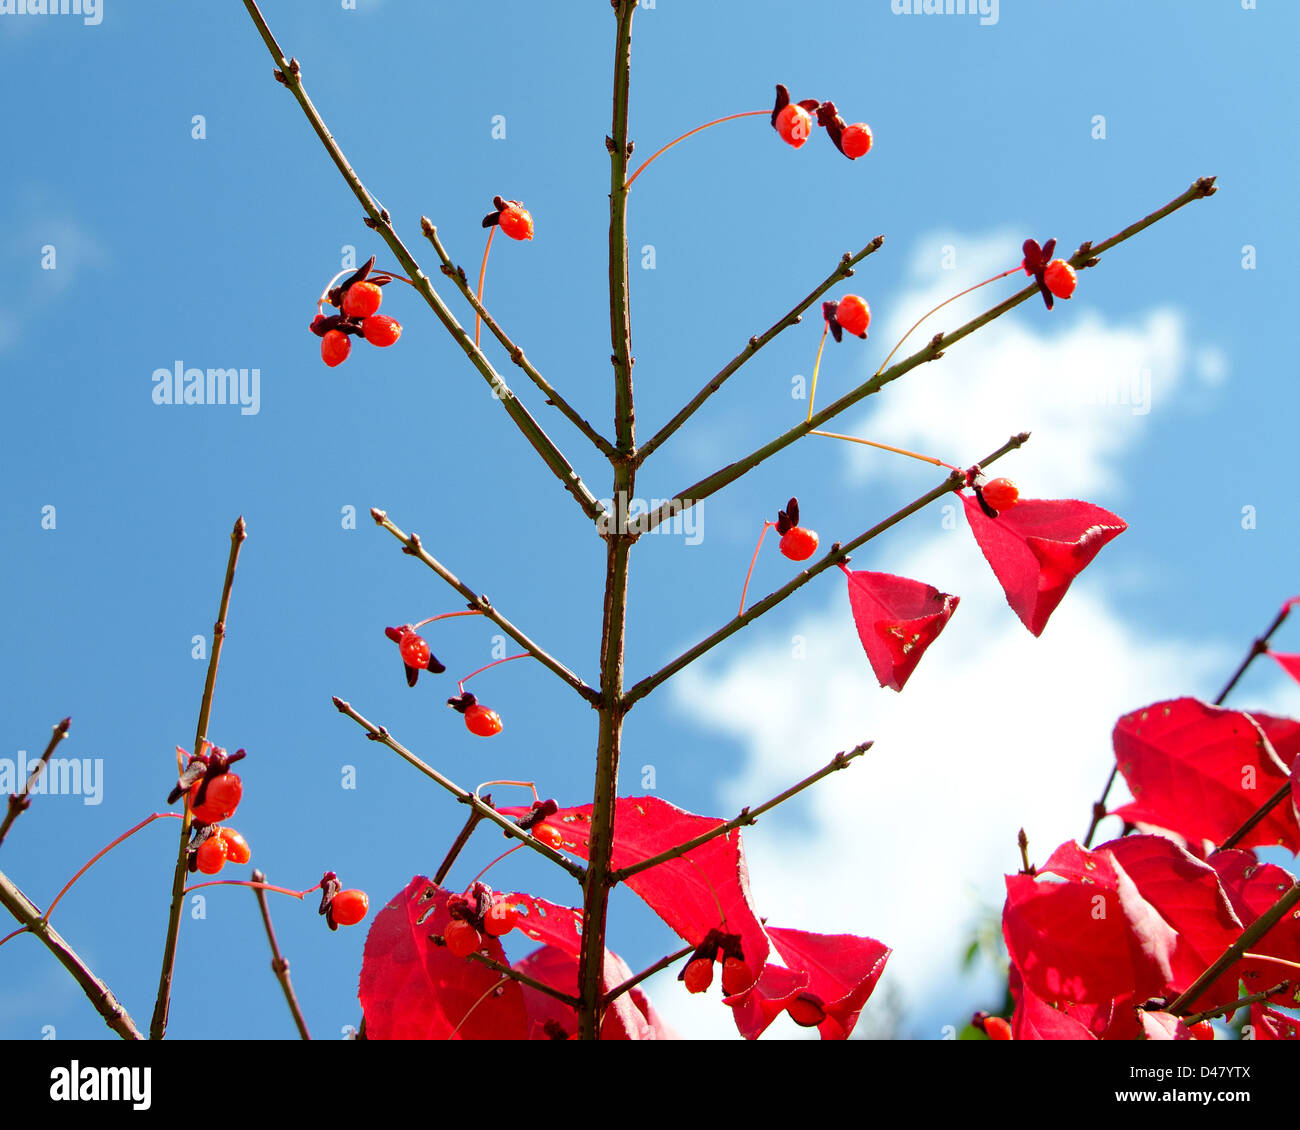 Vivid red berries and leaves of Burning Bush against a blue sky. Stock Photo